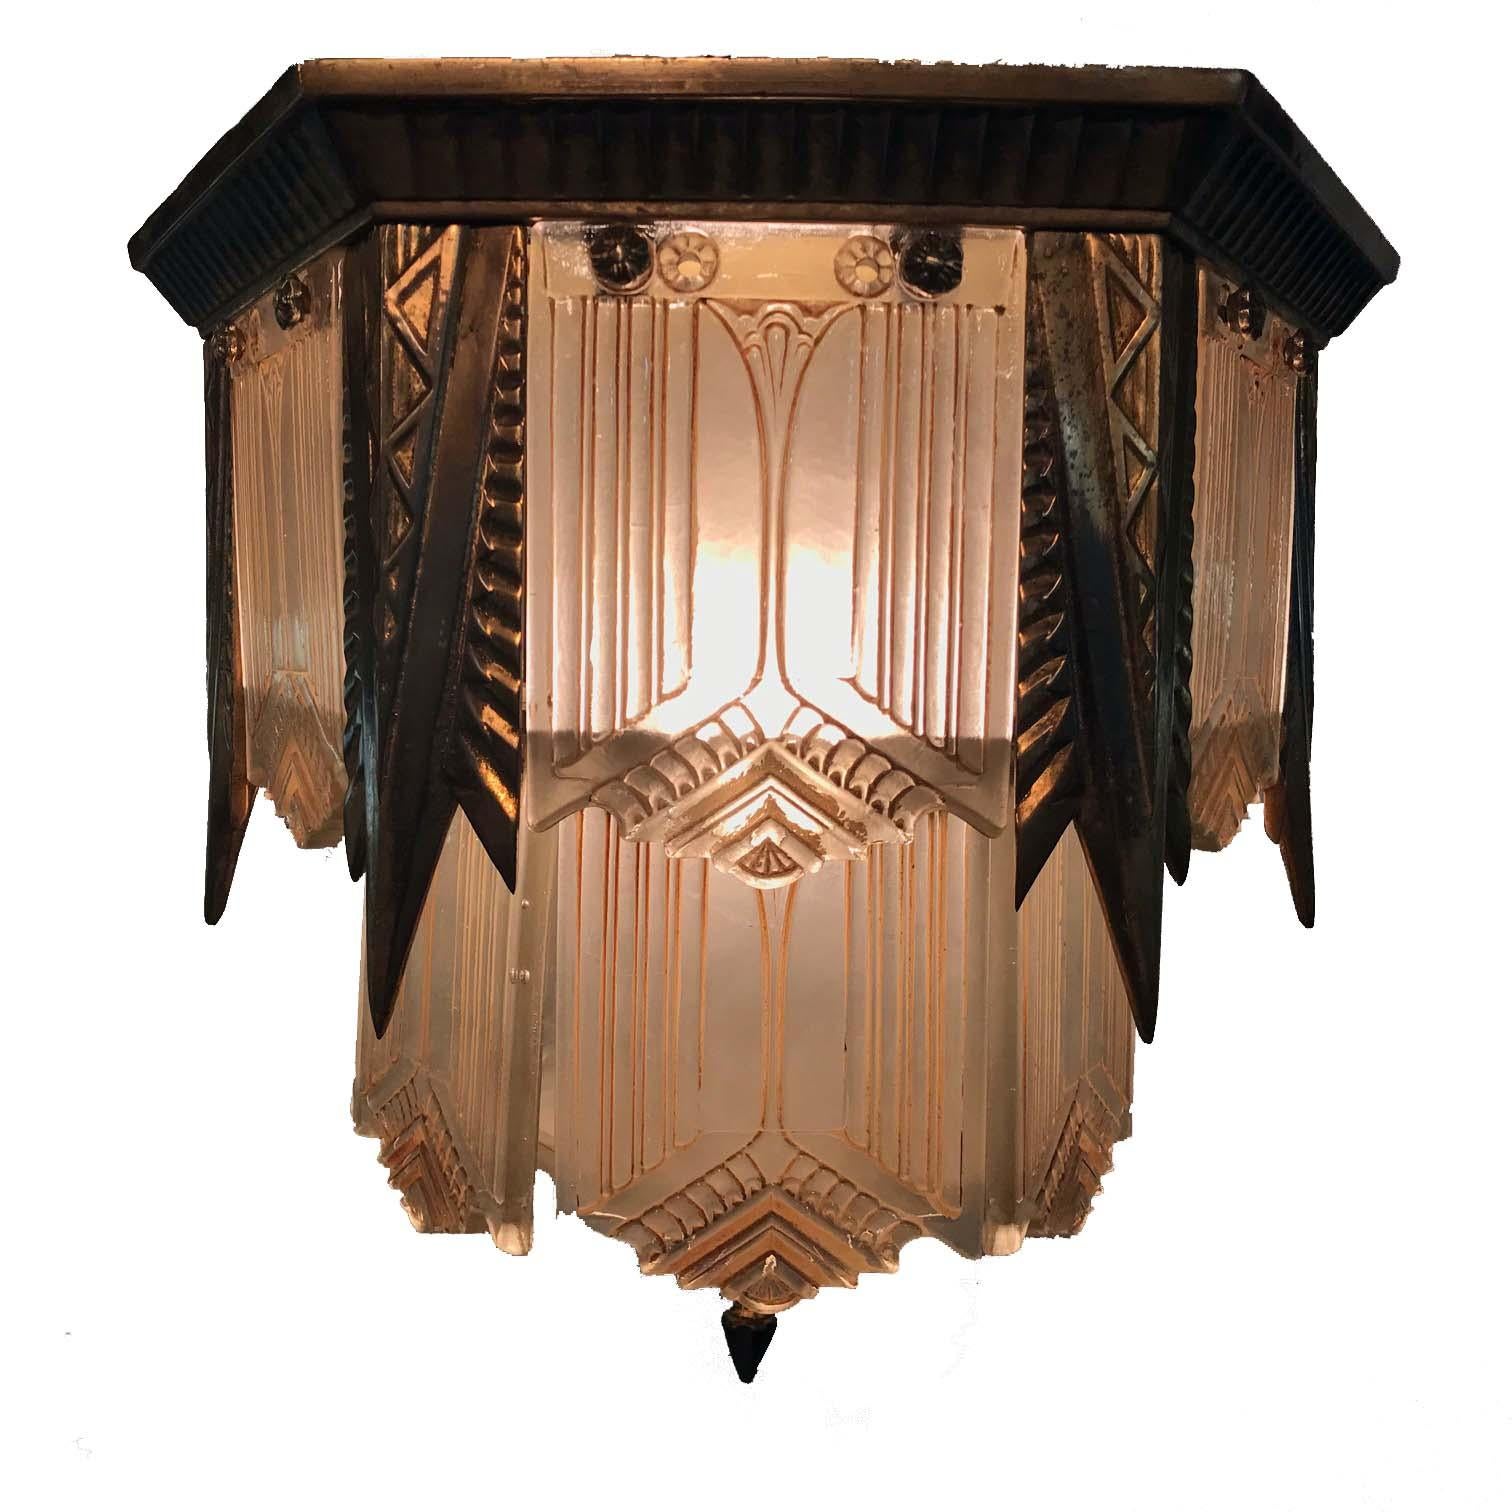 This American flush-mounted glass paneled hall lantern is a rare survival from the Art Deco period. From the detailed hexagonal bronze two-tier frame hang the molded frosted glass panels, each supported by two rosette-form nuts. The colored edging